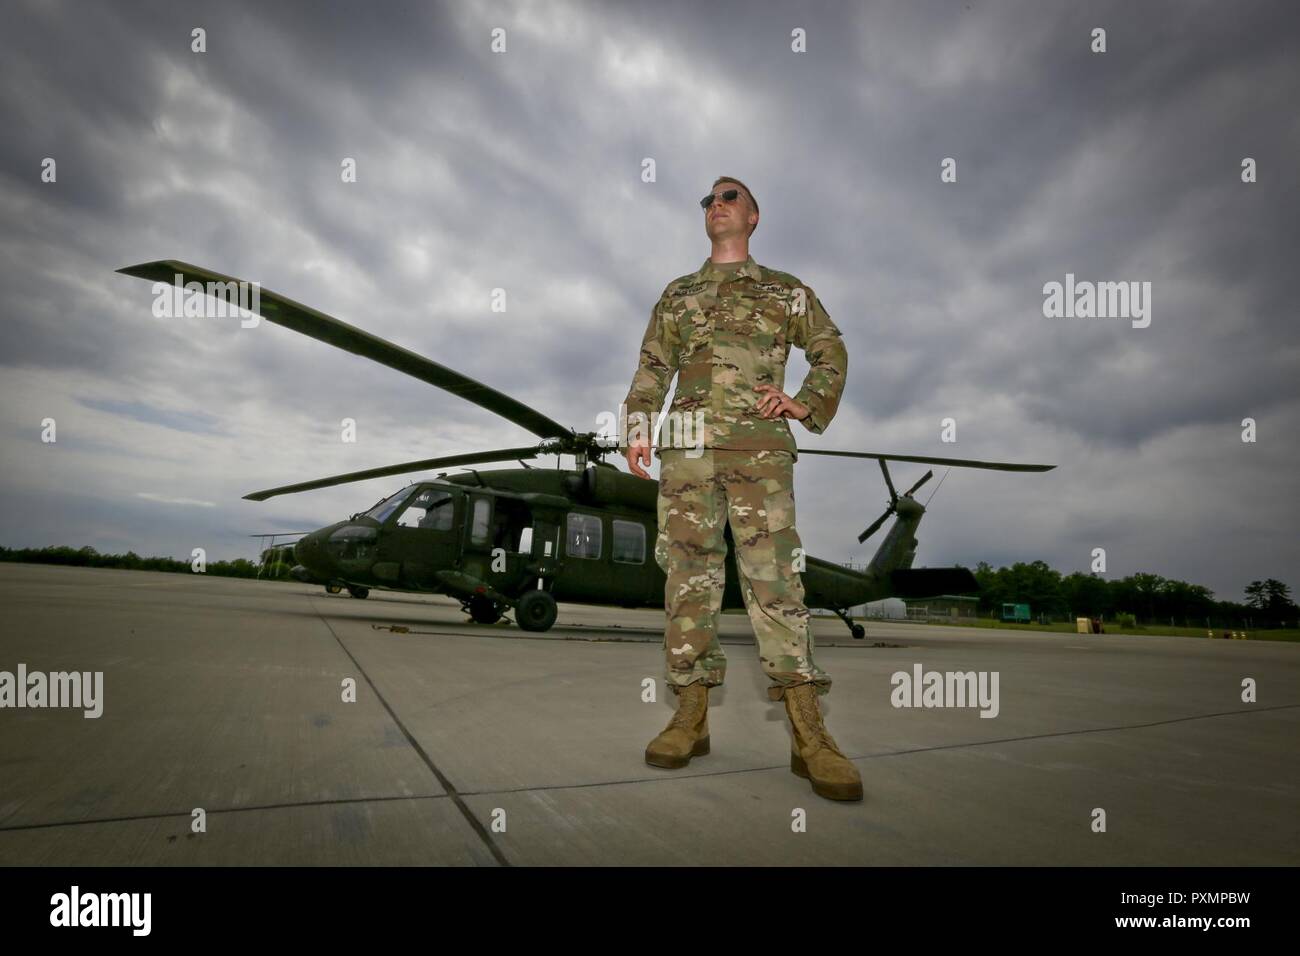 U.S. Army National Guard CW1 Justin Blistyak, assigned to the 1-150th Assault Helicopter Battalion, stands for a portrait at the Army Aviation Support Facility, Joint Base McGuire-Dix-Lakehurst, N.J., June 14, 2017. Stock Photo